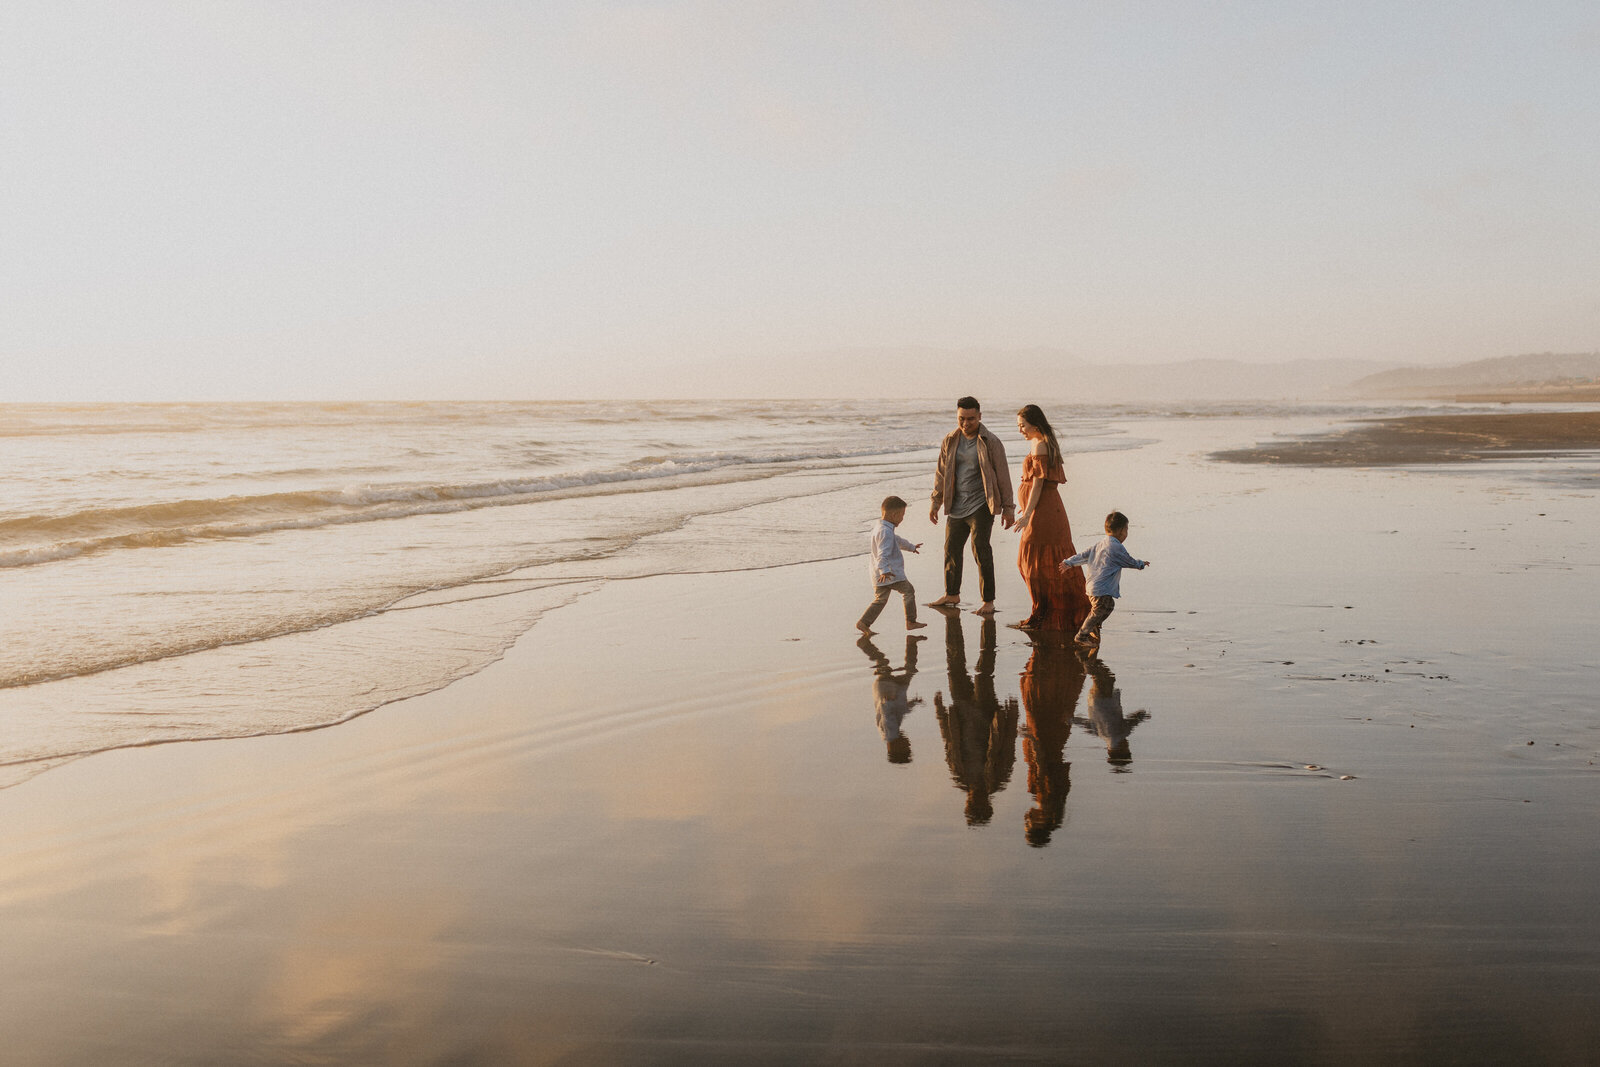 A family of four walks along a beach at sunset, their reflections visible on the wet sand as gentle waves roll in. two adults and two children enjoy the serene, golden-lit landscape.